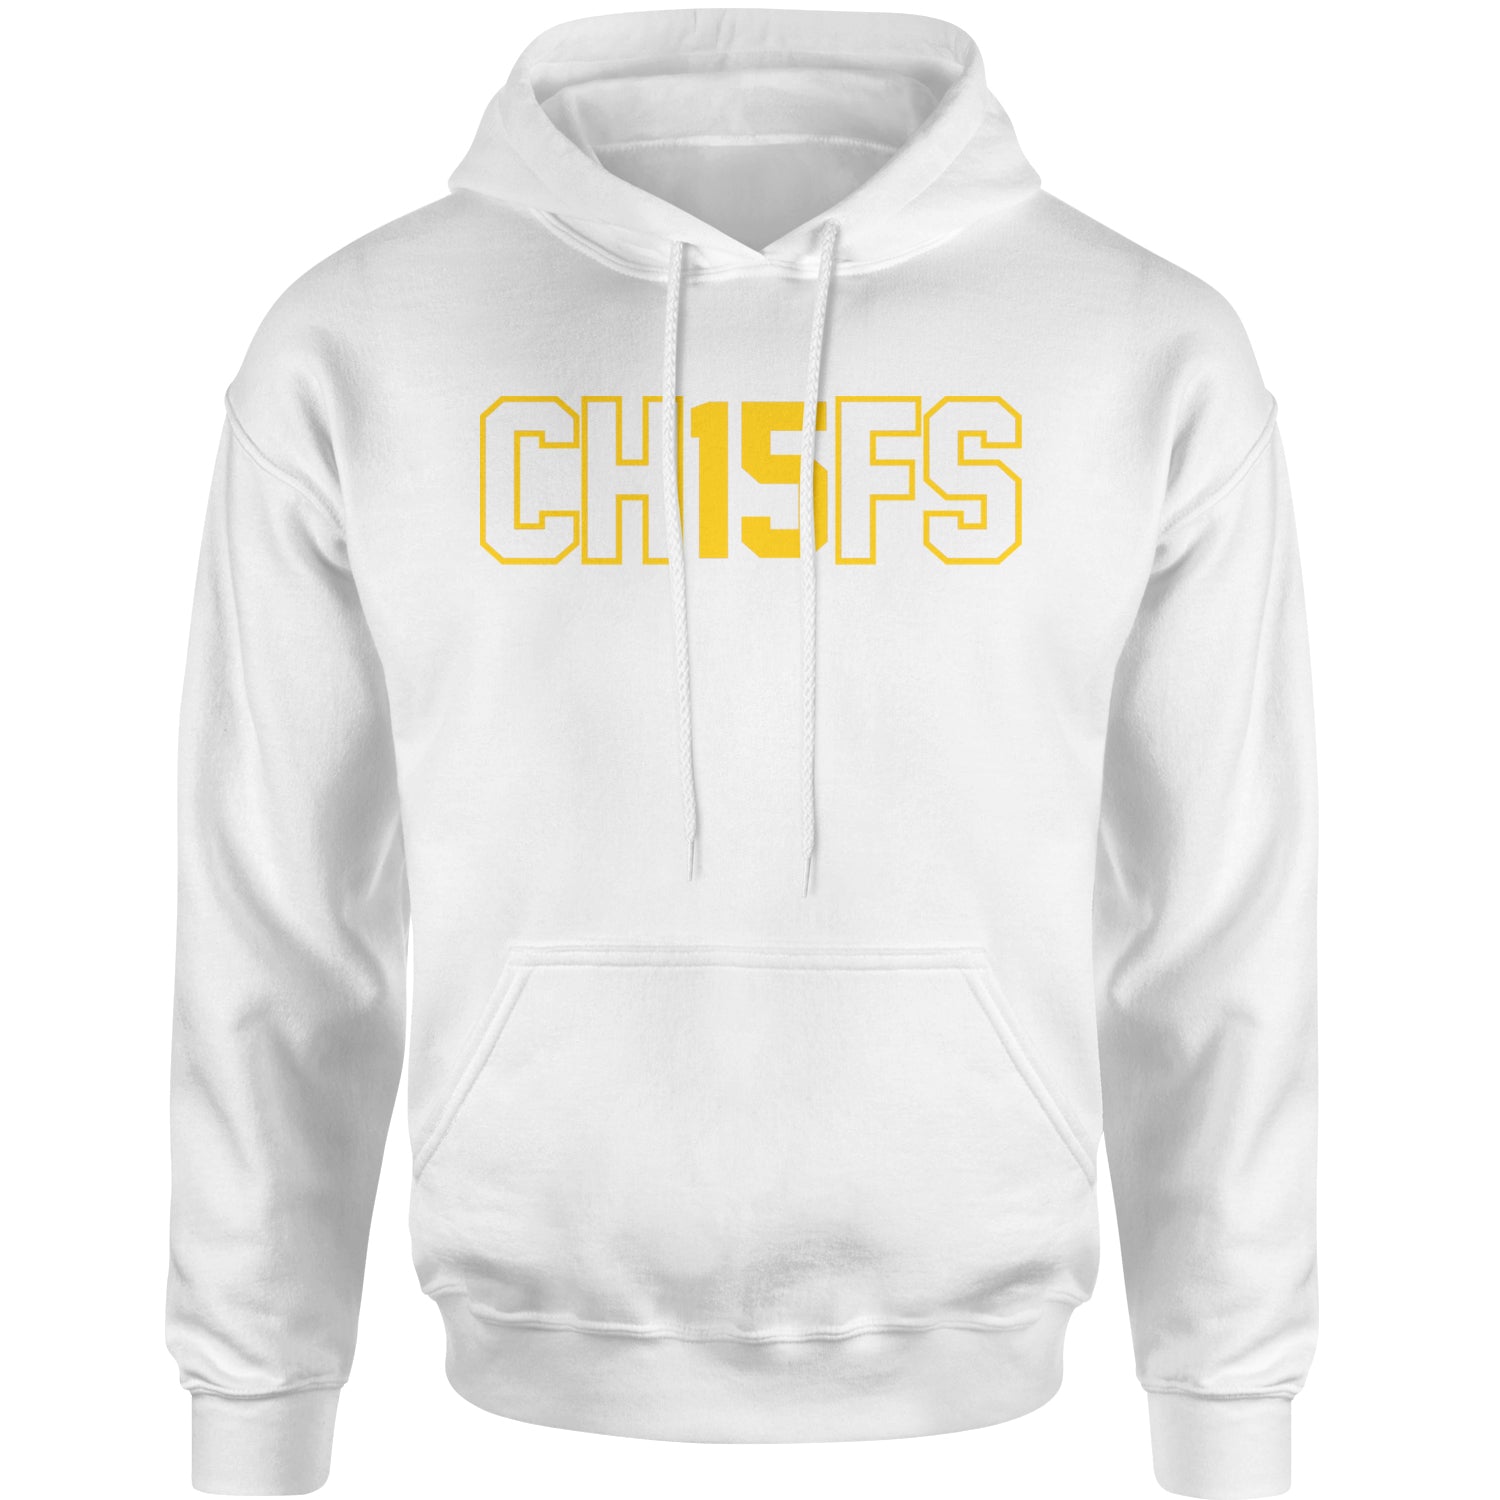 Ch15fs Chief 15 Shirt Adult Hoodie Sweatshirt ass, big, burrowhead, game, kelce, know, moutha, my, nd, patrick, role, shut, sports, your by Expression Tees